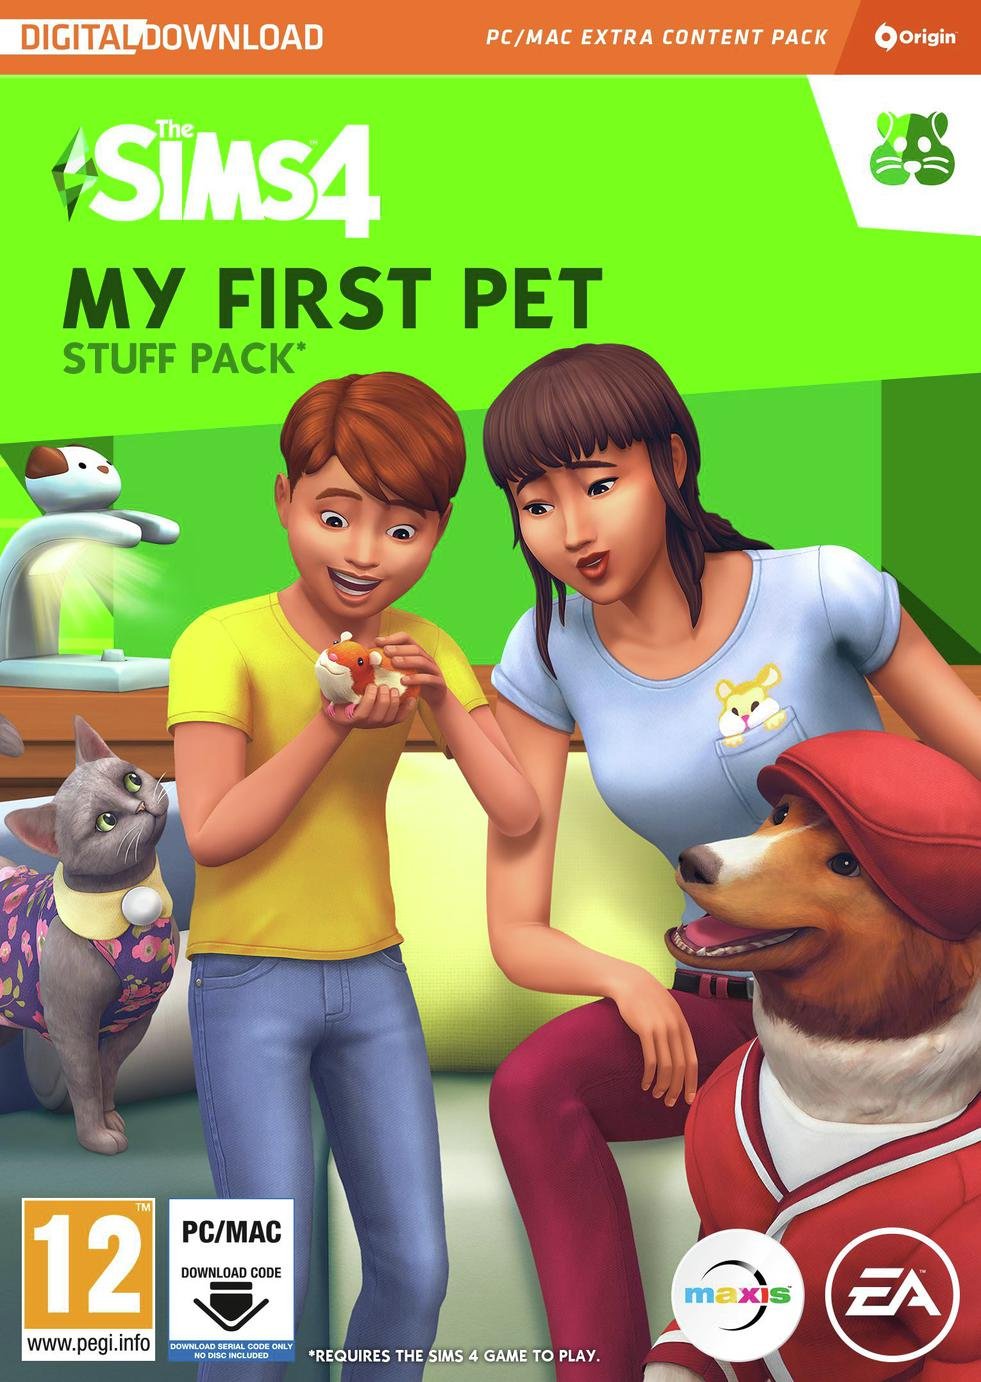 The Sims 4 My First Pet Stuff Pack PC Game